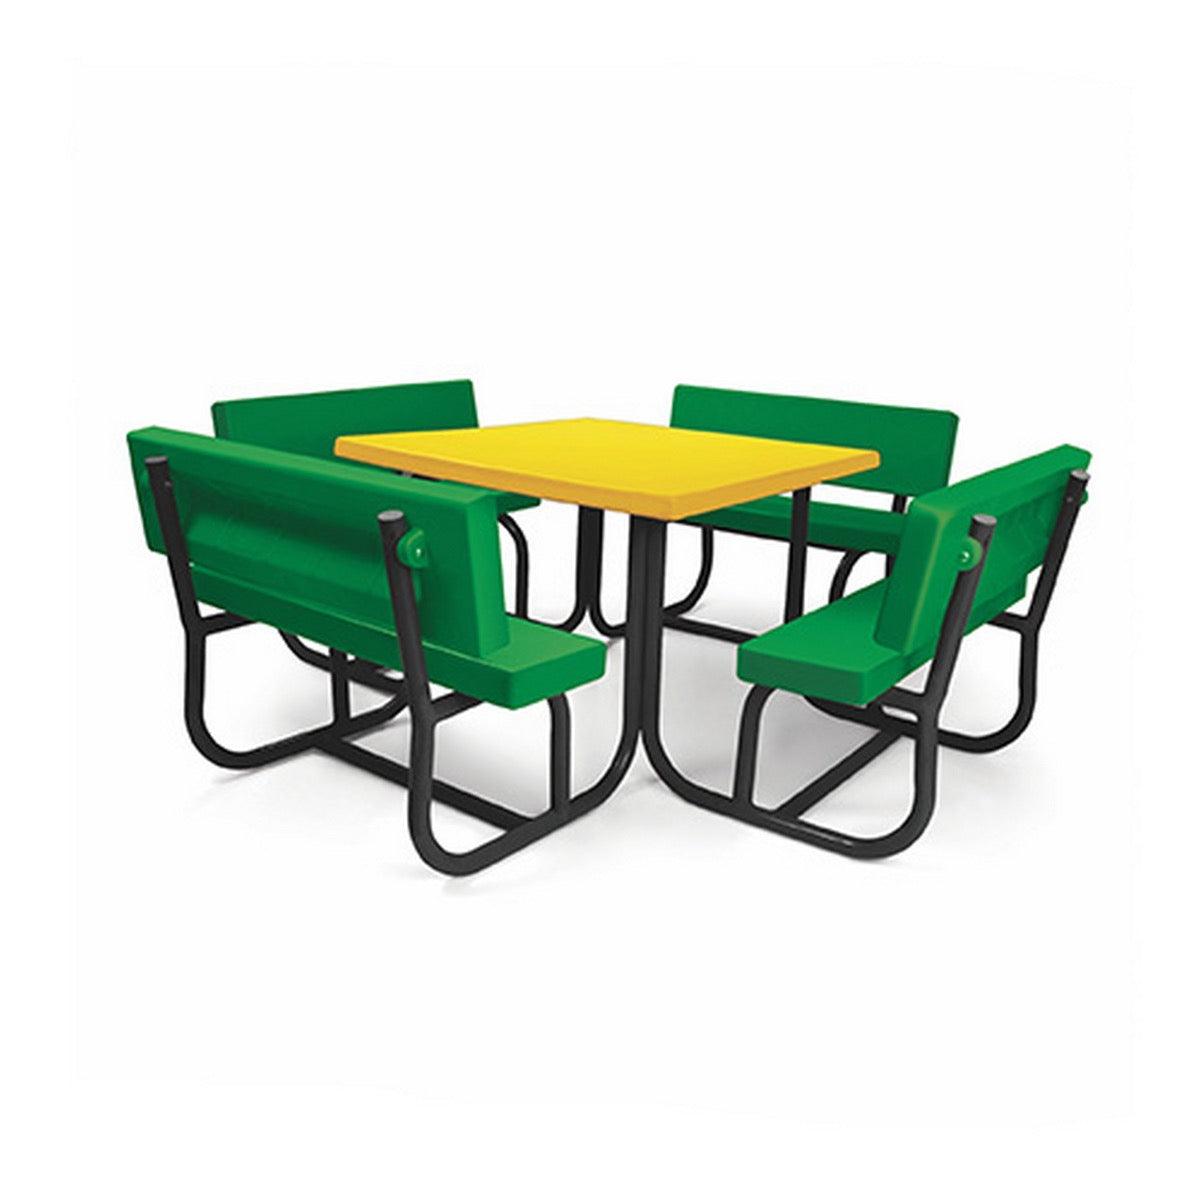 Ok Play Senior Coucil, Desk ‚Äö√Ñ√≤N' Chair For 8 Childrens, Study Table Perfect For Home And School, Green & Yellow, 5 to 10 Years